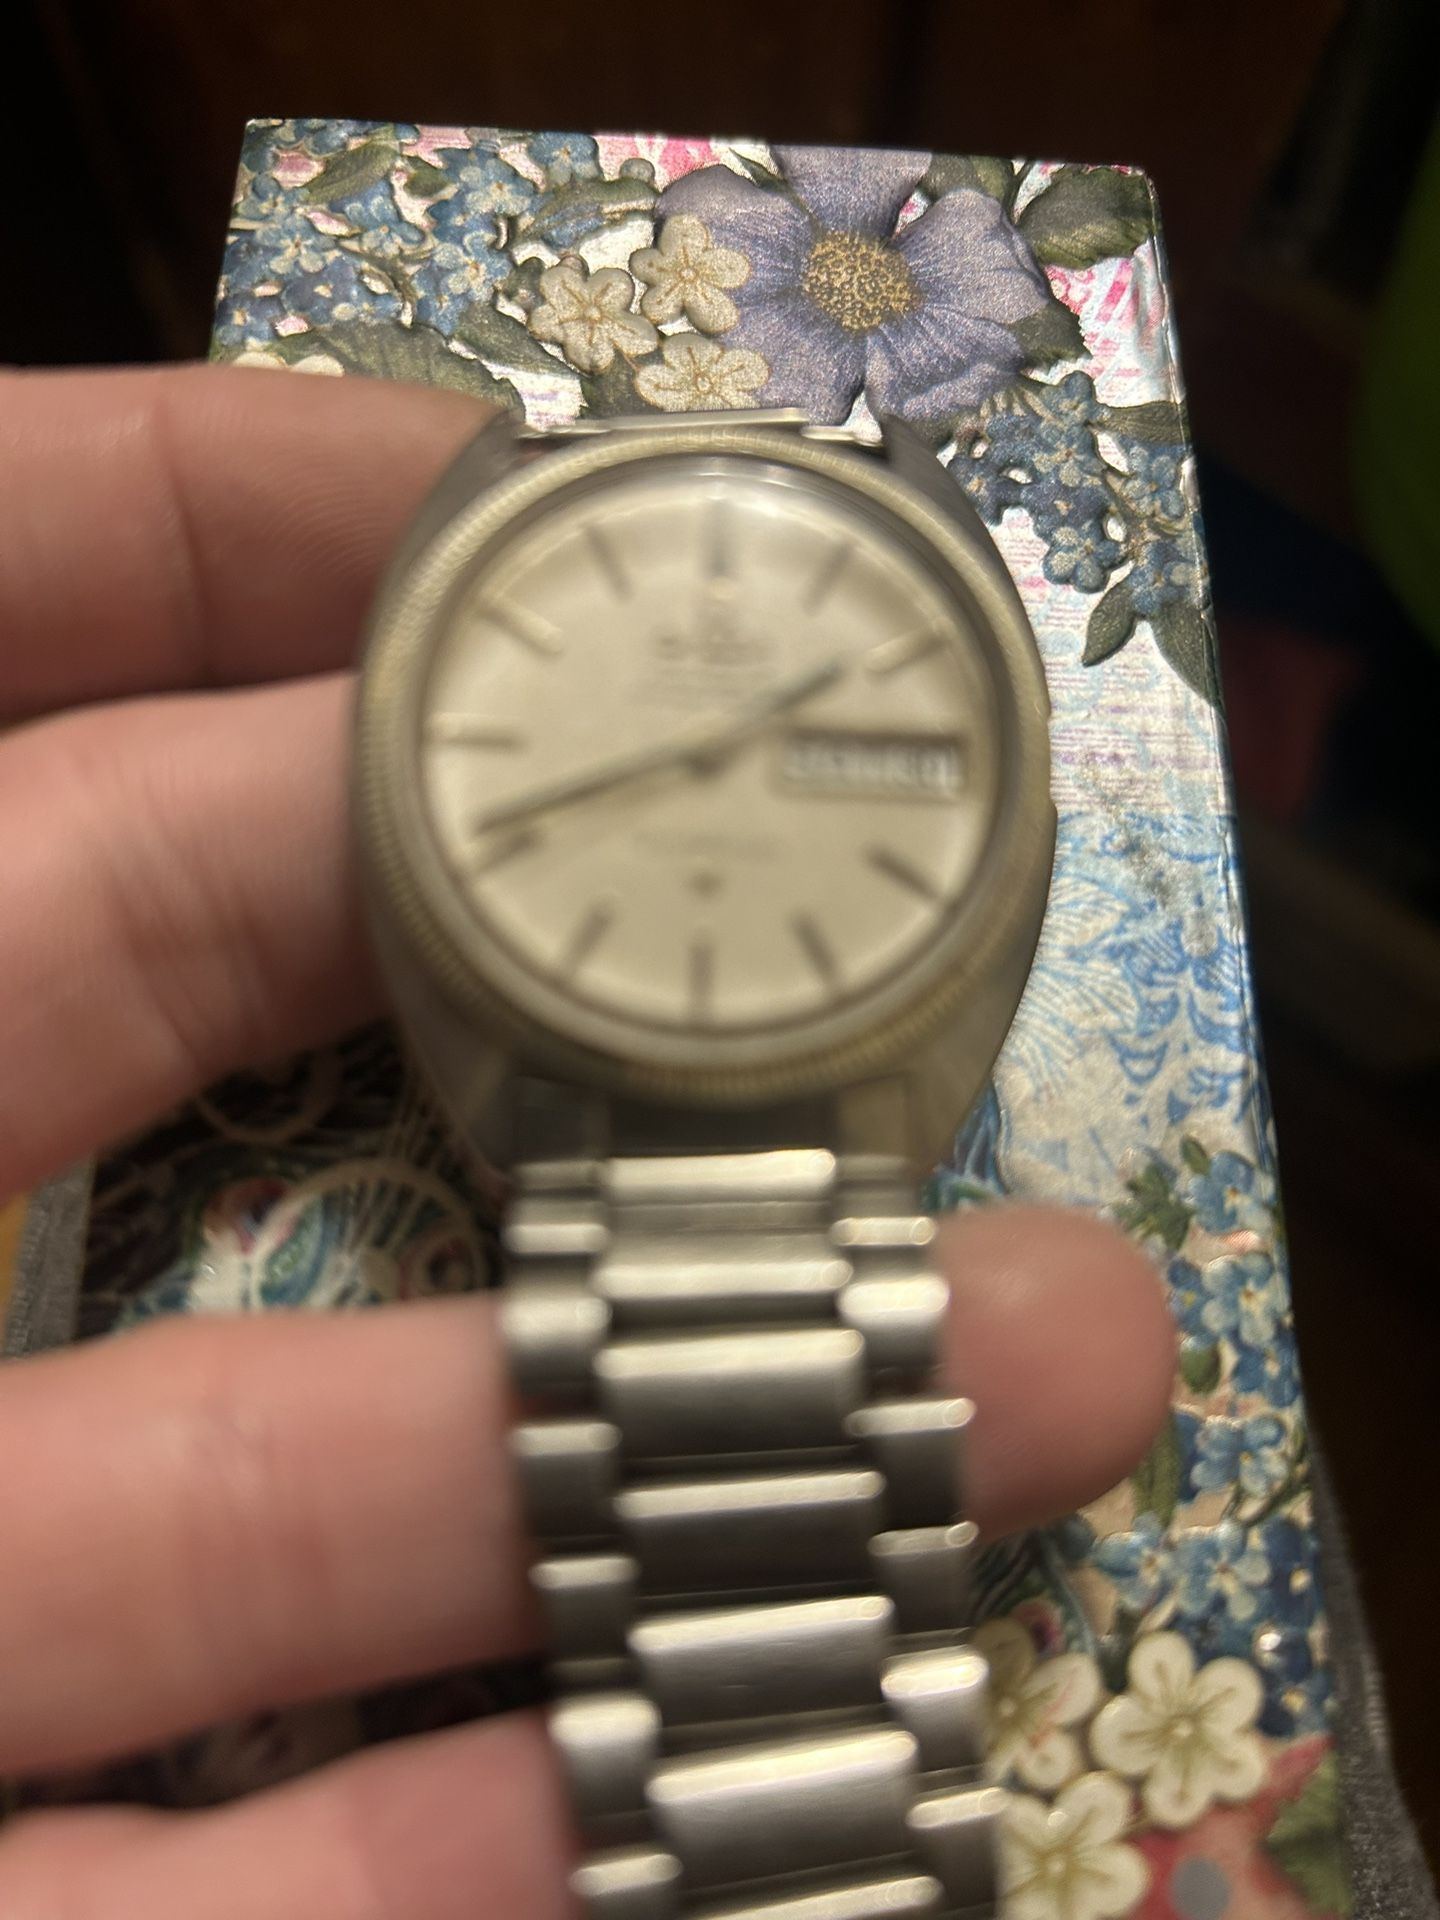 ) Omega Watch for sale!1970